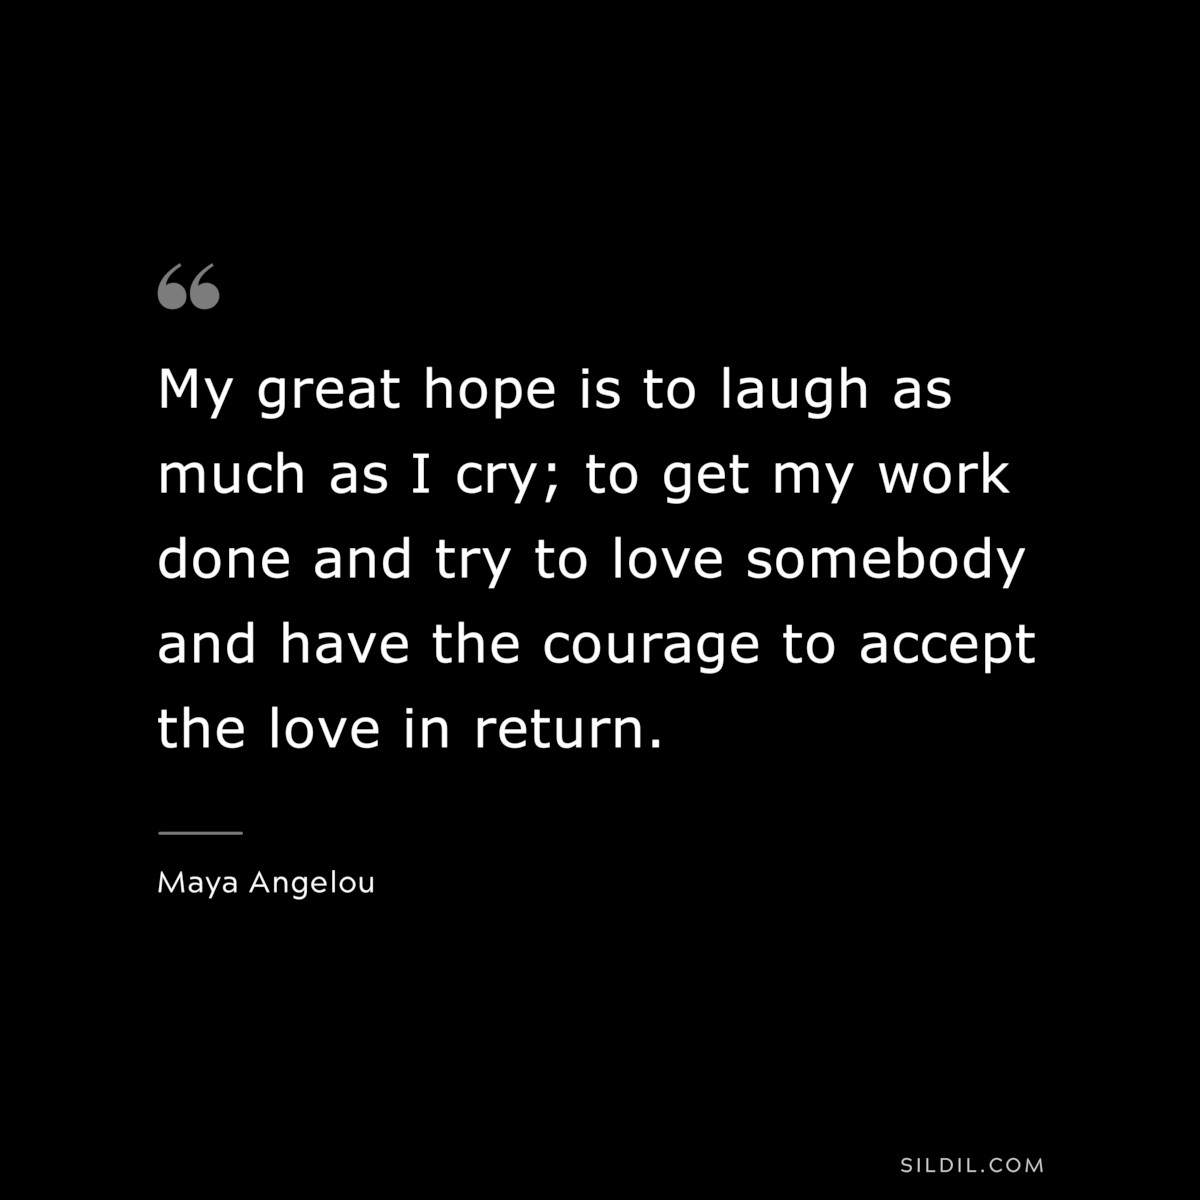 My great hope is to laugh as much as I cry; to get my work done and try to love somebody and have the courage to accept the love in return. ― Maya Angelou